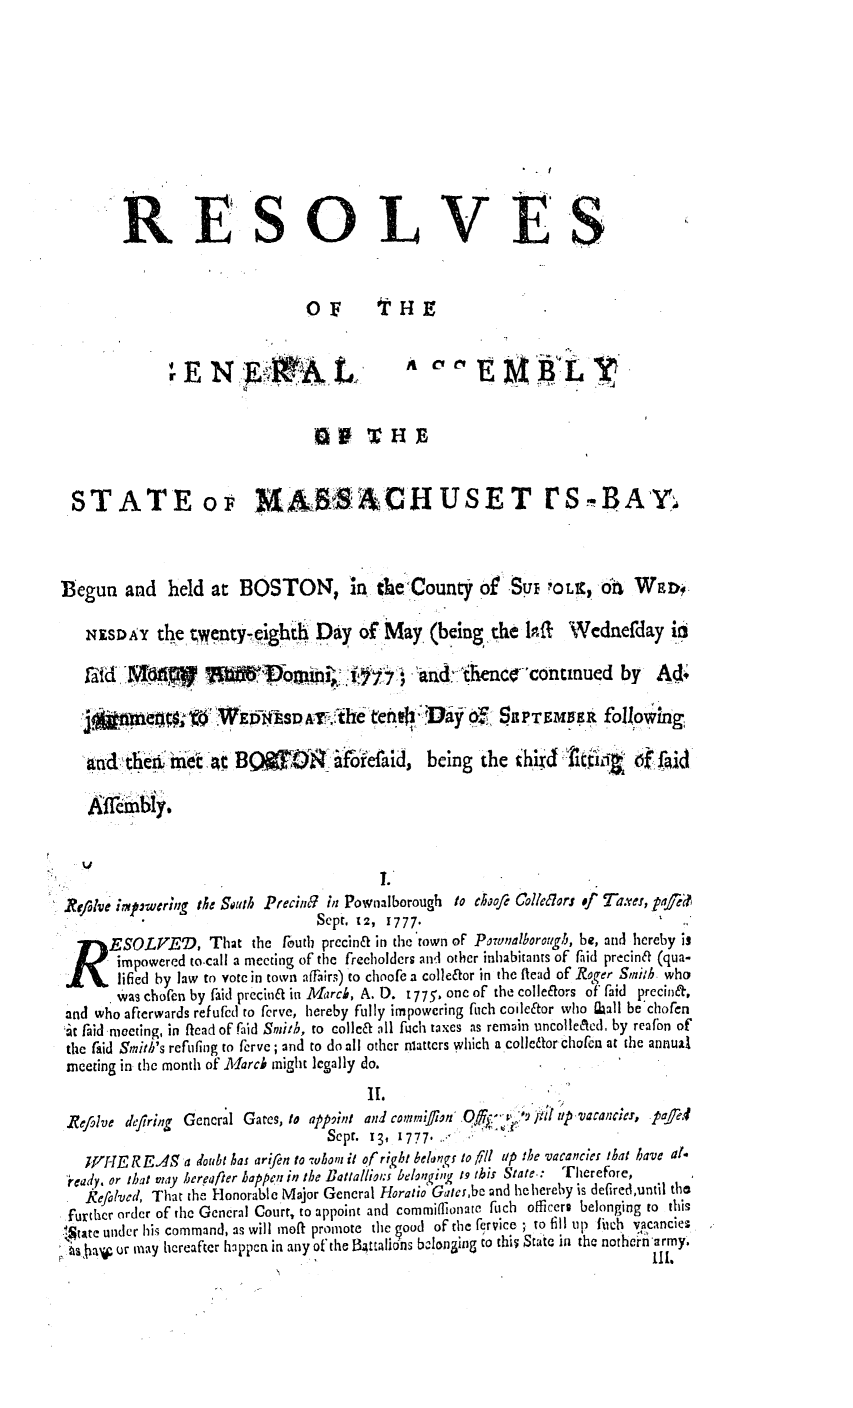 handle is hein.ssl/ssma0215 and id is 1 raw text is: RESOLVES
oF        t HE
STATE or 16& ACH U S E T r S B AY4
Begun and      held at BOSTON, in the County otSui ?OL%, Of                    WED0,
NEsDAY the twenty-eghth Day of, May (being the IP-a Wednefday ii
A i d            W11 W,~D   mii V'07           and nihencocontinued by          Ad.
.                      eD            y O   SUPTEMER following
ad theai Met  'n   BQO      ? '   oiefaid, being the thiXT. flccii           fd
Refahse irnp~wering th~e So~llb Precii n Pownalborough to choo/e Colle6Iors of Taxver, pte
Sept. U2, 1777.
R     ESOLVED, Th2t the foutb precin& in the town oF Powalborough, be, and hereby is
impowered to-call a meeting of the freeholders and other inhabitants of fiid precin& (qua-
lified by law to vote in town affairs) to choofe a colle&or in the flead of Roqer Smi'h who
was chofen by faid precin&t in MIrck, A. D. 1775, one of the collelftors of faid precina,
and who afterwards refufcd to ferve, hereby fully impowering fuch coilector who Iall be chofen
;t faid moeting, in flead of Faid Switb, to collc& Al fuch taxes as remain uncolle&ed, by reafon of
the raid Smitb's refinflg to ferve; and to do all other nlatters which a collcfor chofen at the annual
meeting in the month of Aarch might legally do.
Refalve deytring Gencral Gates, to appint and cotimi/ian Off.,- ') ;rii tp.vacancies, pfed
Sept. 13, 1777.
W-E R EA5 a doubt has arifen to wboni it of right belkn~ to §11 UP the vacances That have at-
'ieady. or that may hereafter happen in the Battalli:ol. beotgi,, 1.9 this State:  Therefore,
kefolved, That the Honorable Major General Horatio Galcr,bc and he hereby is defired,until the
further order of the General Court, to appoint and commiflionate fich officere belonging to this
ltac under his command, as will moft promote the ood of the fervice ; to fill up fWeh vacanciez
ae udr may hcreafr happn in any ot the 13talins bclonging to thi  Staic in the norhei'n'army.
. . ..                           m a   e e f e  lp                             l l.


